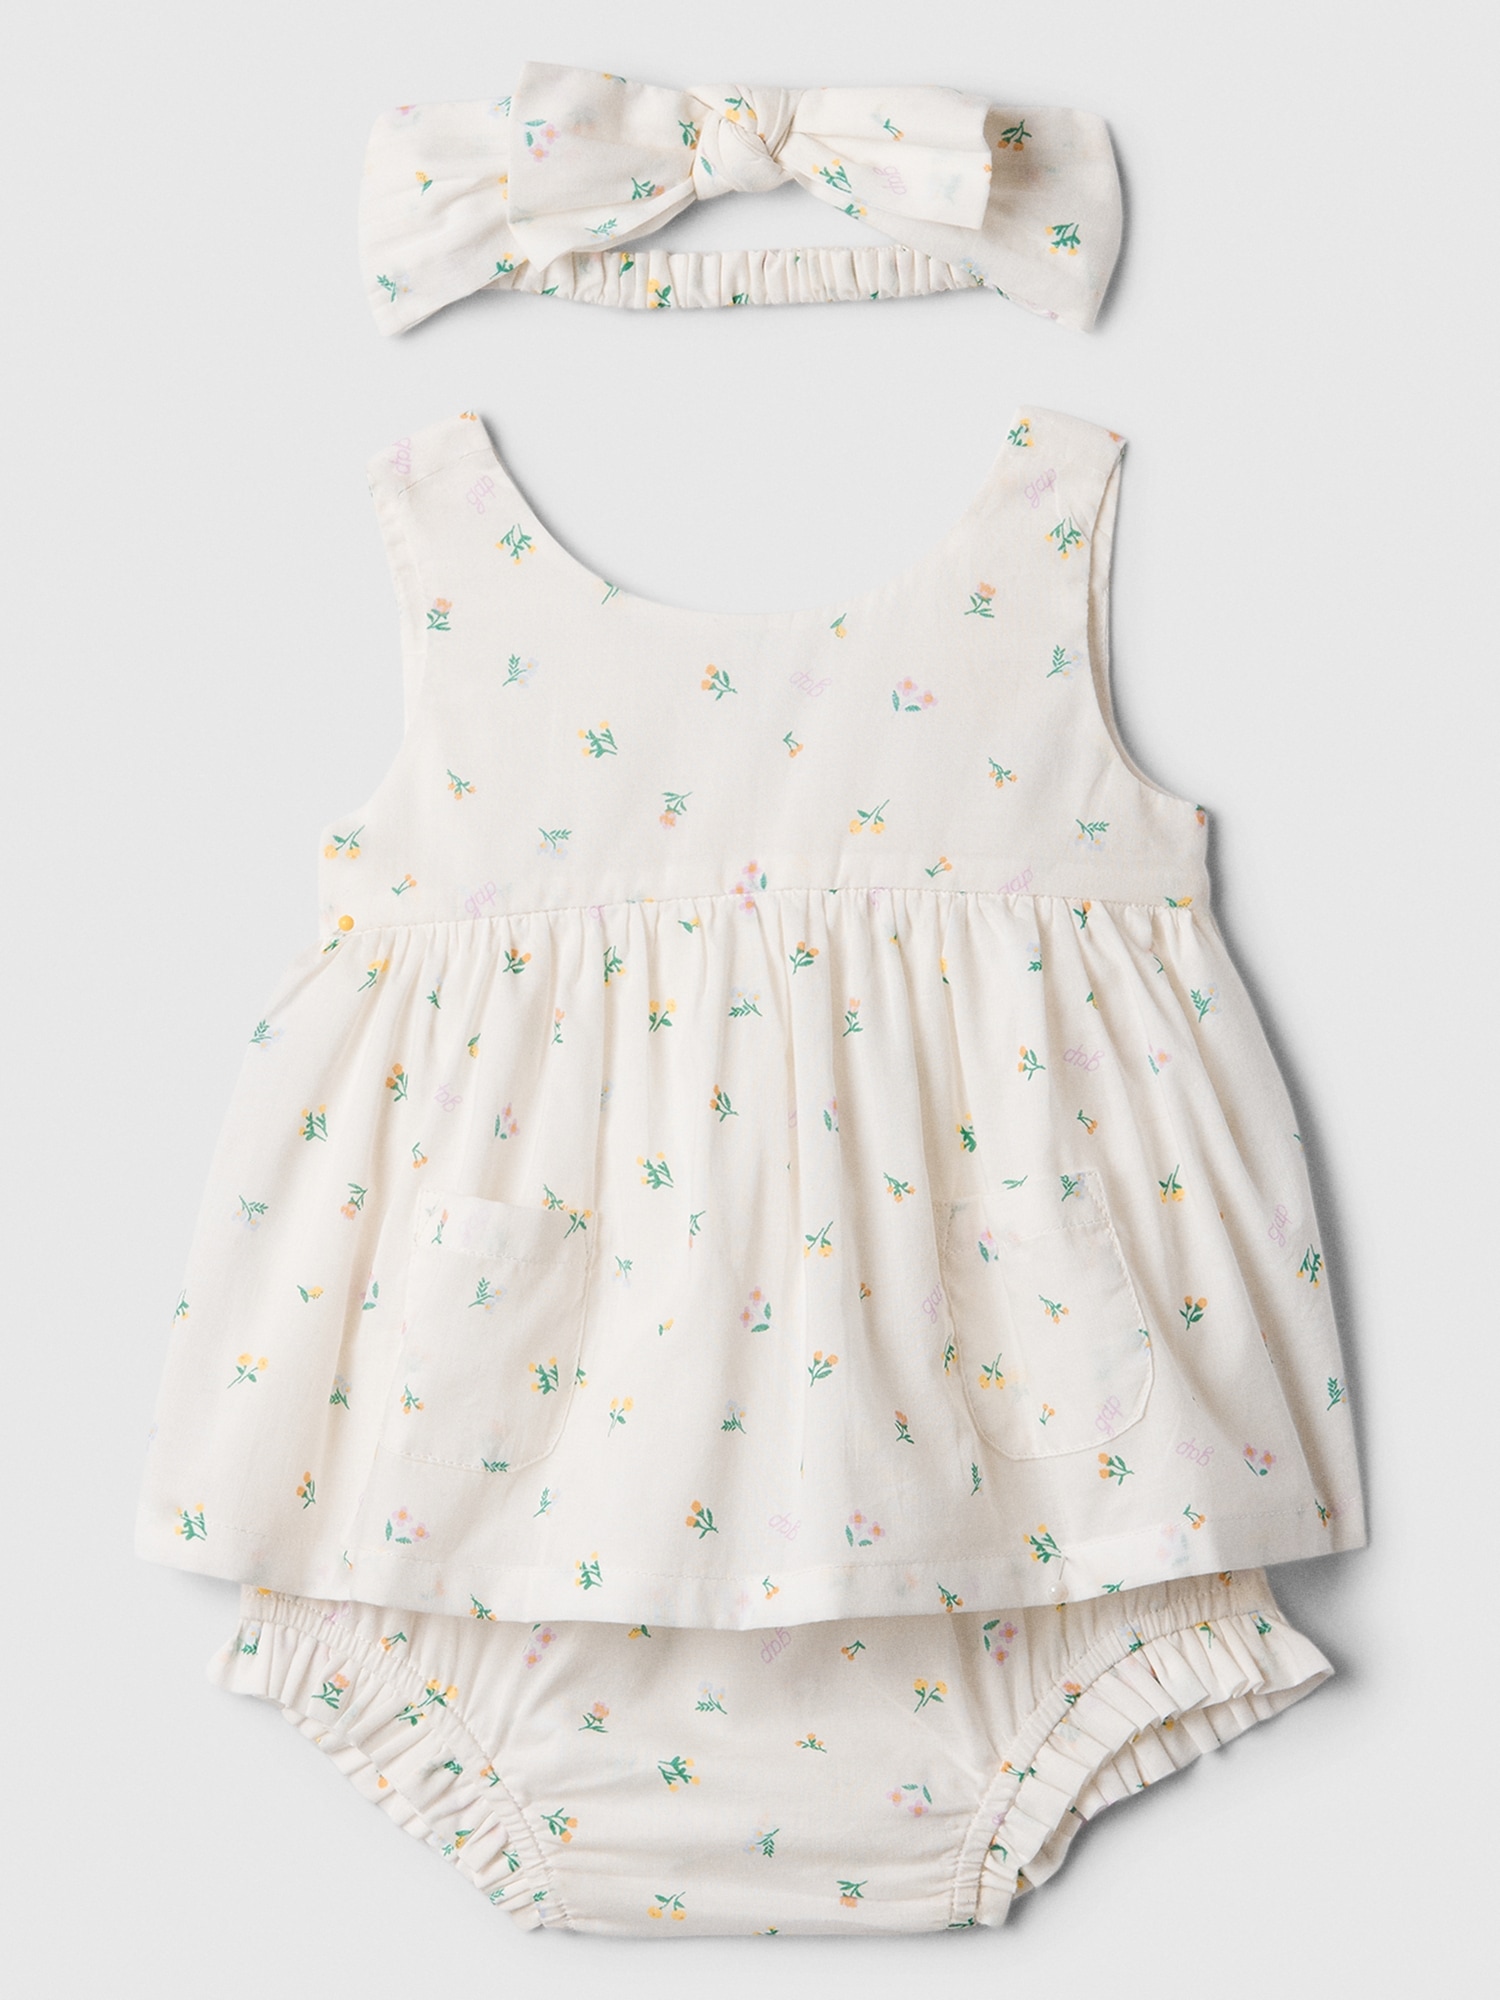 Baby Print Three-Piece Outfit Set